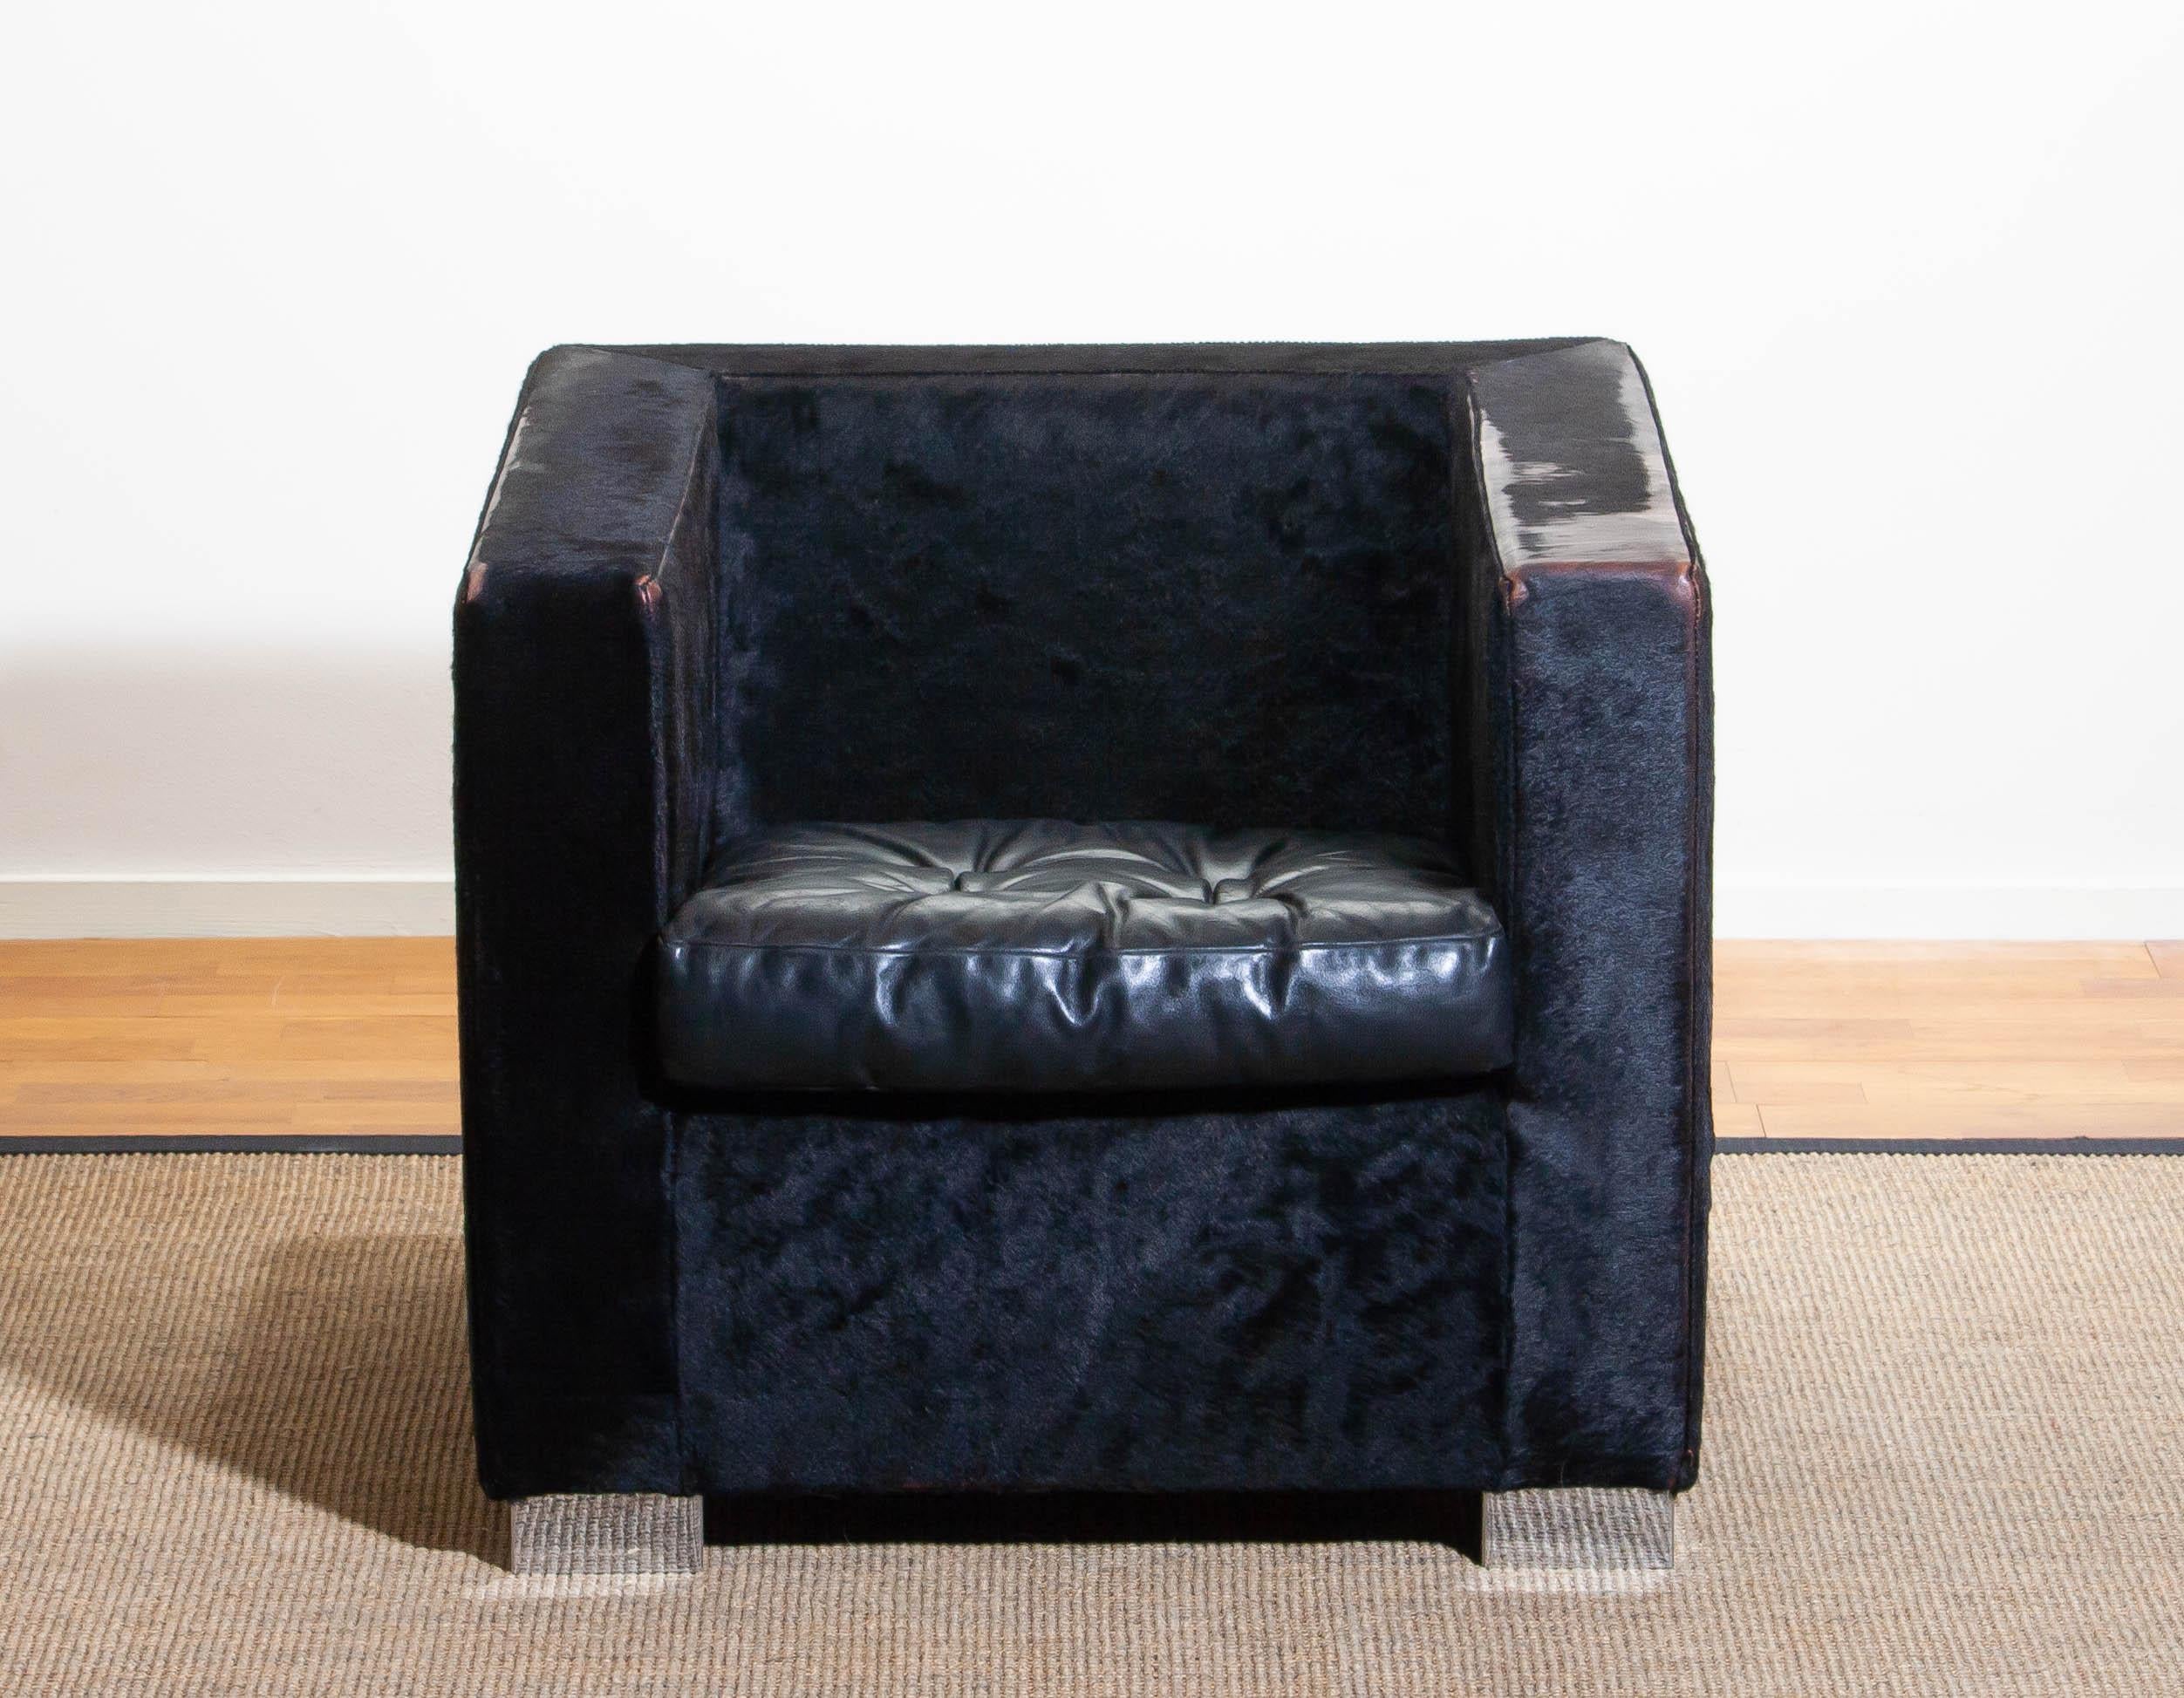 Late 20th Century 1990s, Black Rodolfo Dordoni for Minotti Lounge Chair in Pony and Leather